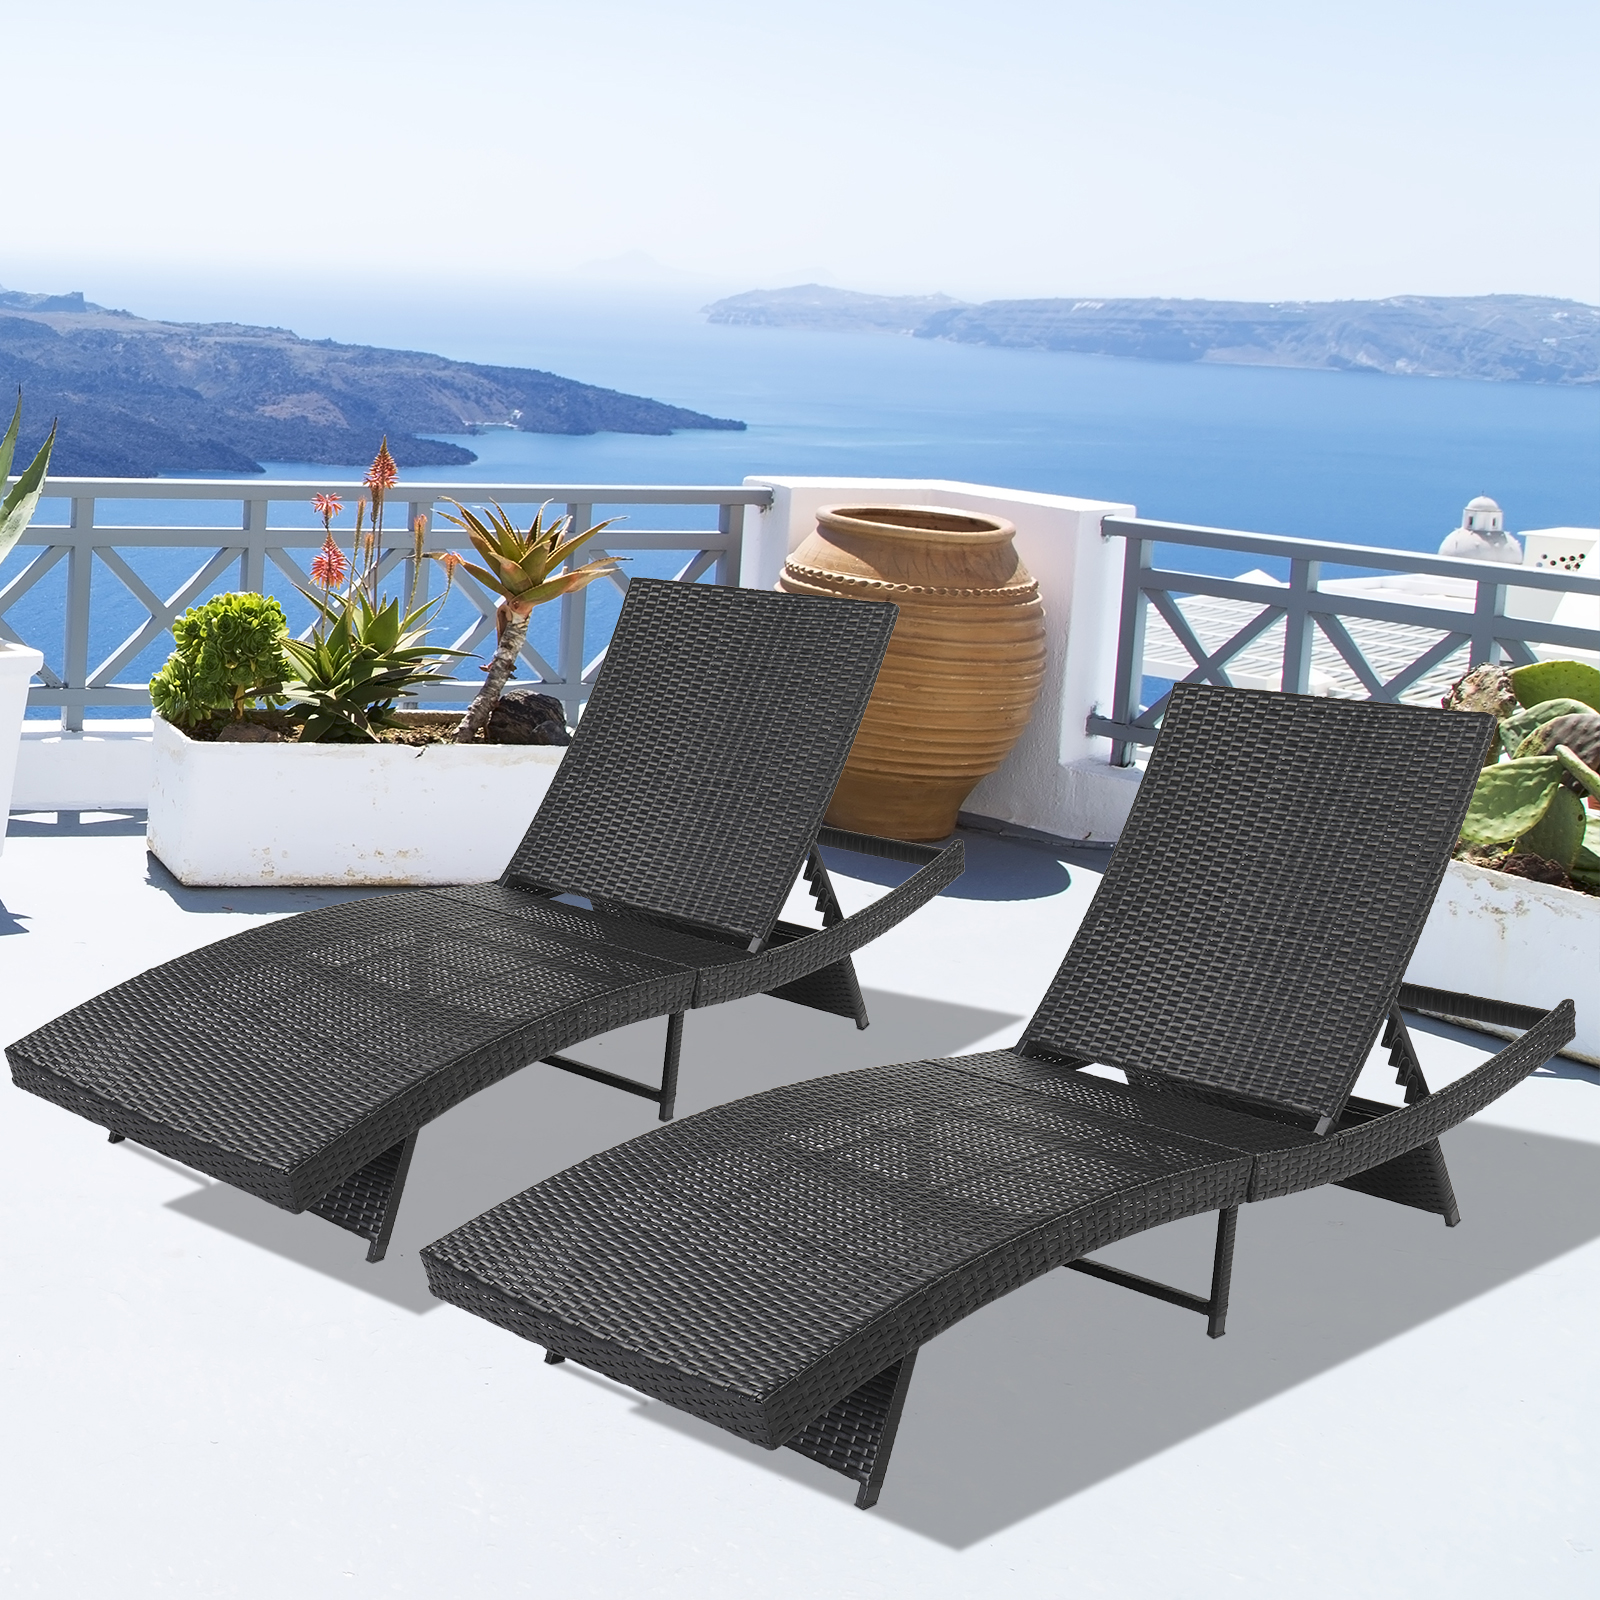 Outdoor Patio PE Wicker Chaise Lounge, 5-Position Adjustable Reclining Lounge Chair, Outdoor Sun Lounger with Removable Cushions for Patio Poolside Backyard Porch Garden, B32 - image 4 of 9